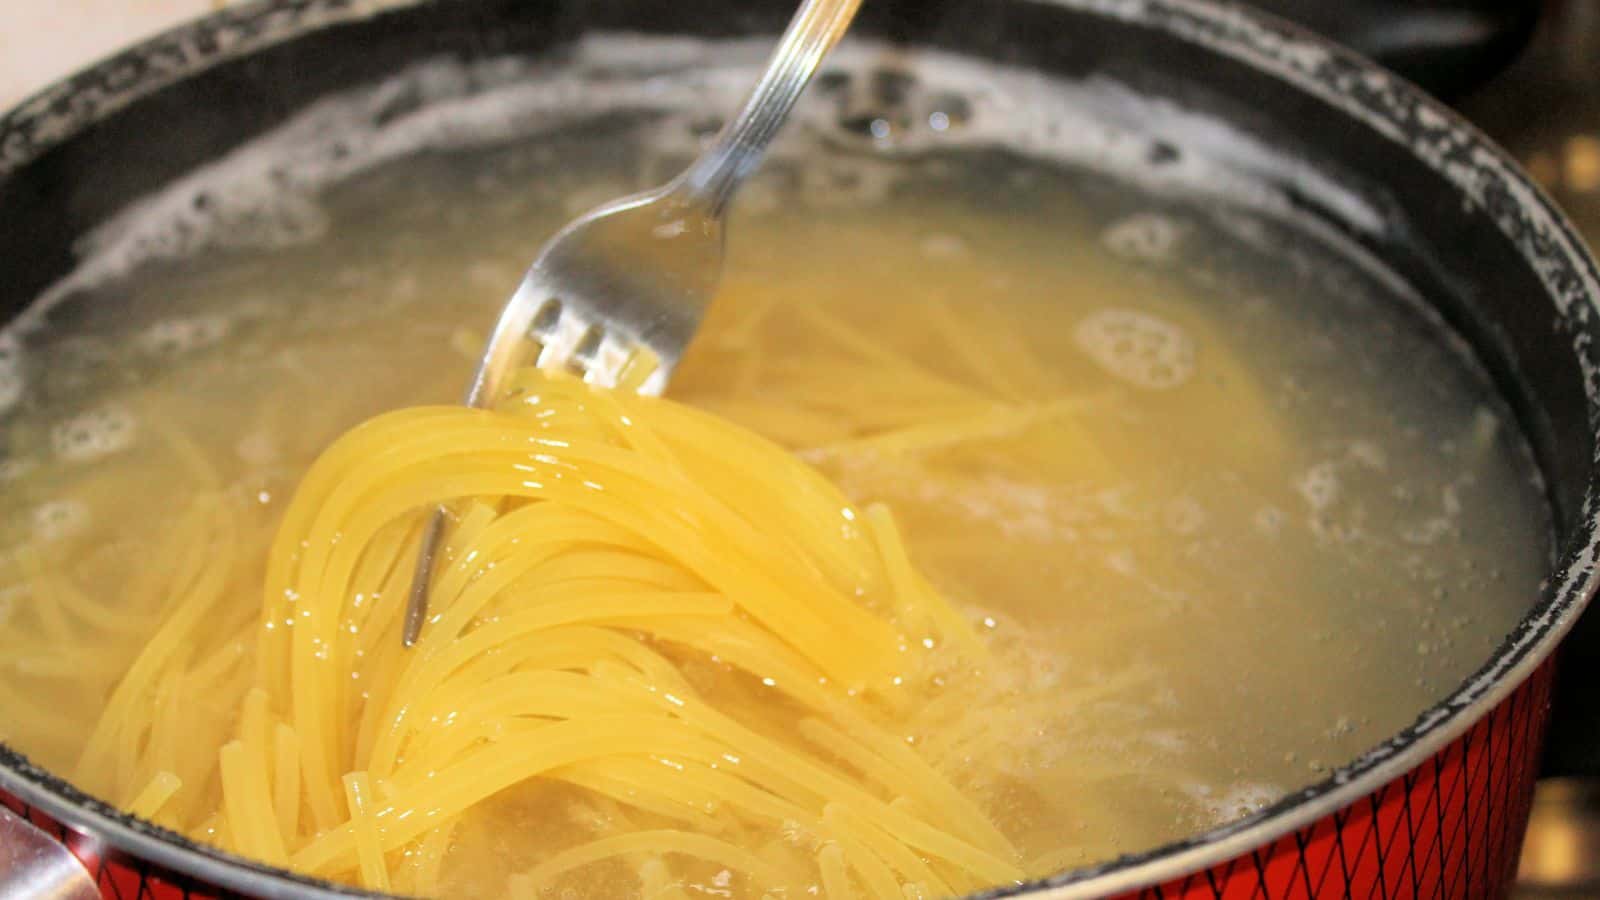 Spaghetti cooked in boiling water.